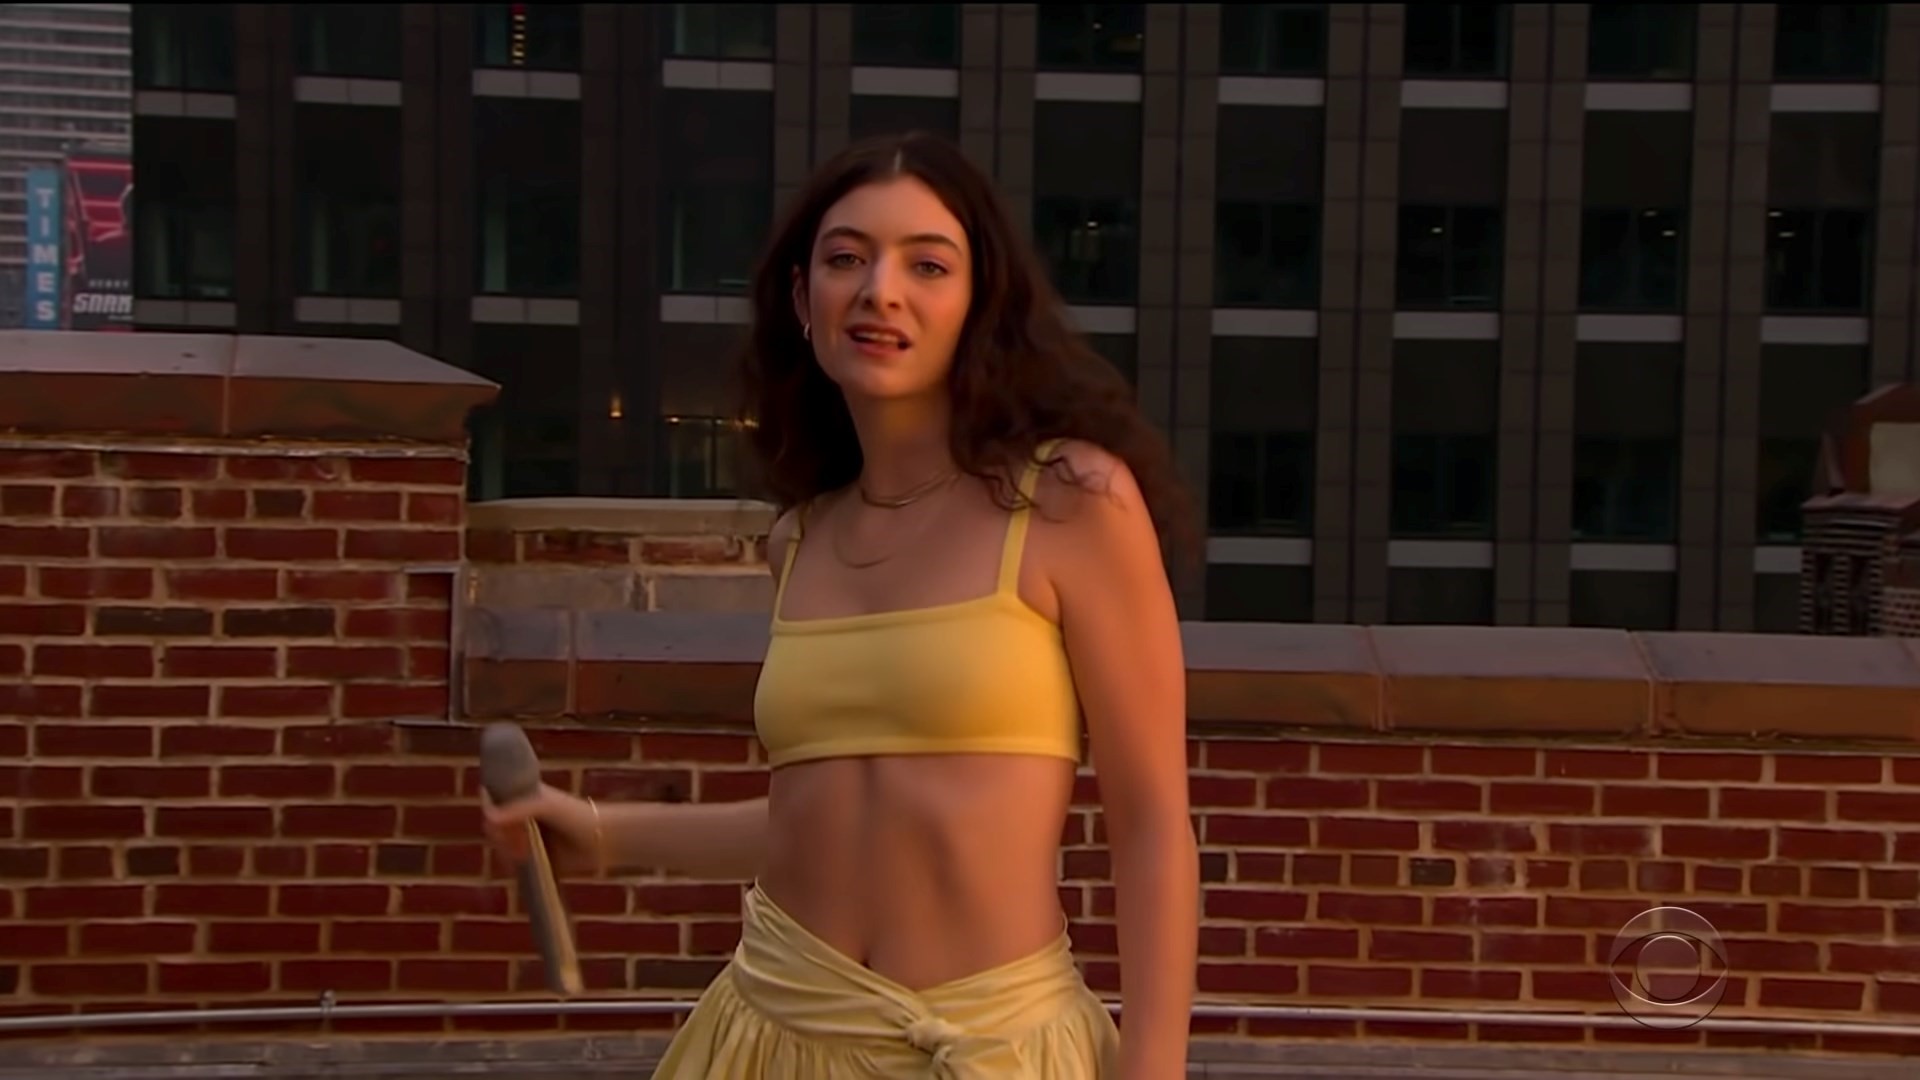 Watch Lorde perform a dreamy rendition of 'Solar Power' on an NYC rooftop